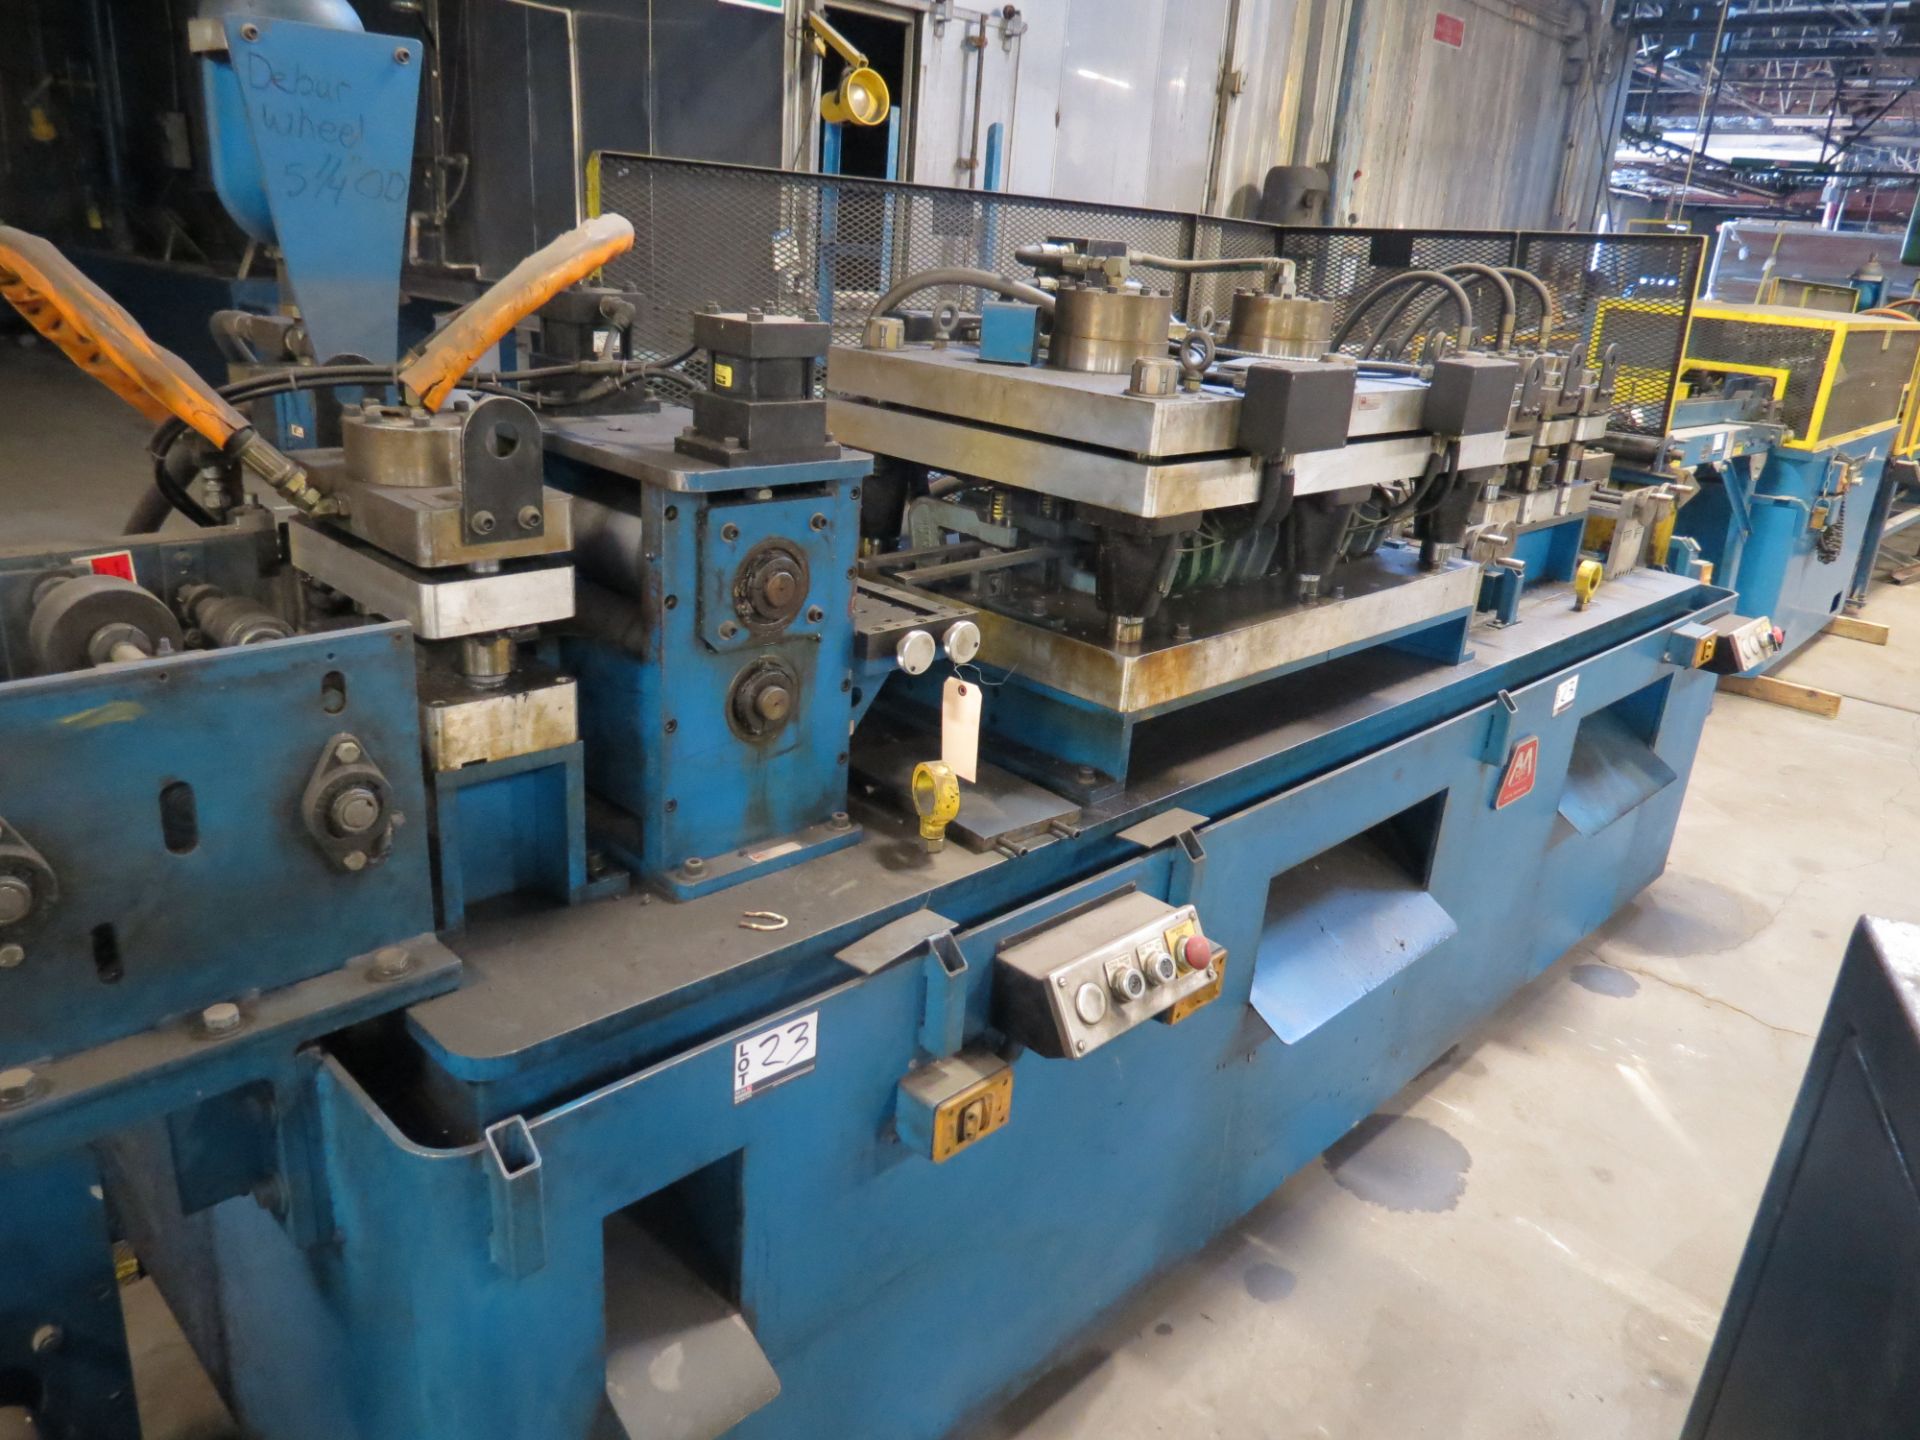 AMS Material Straightener with hyd shear & punches, XL 100 Controls - Image 6 of 7